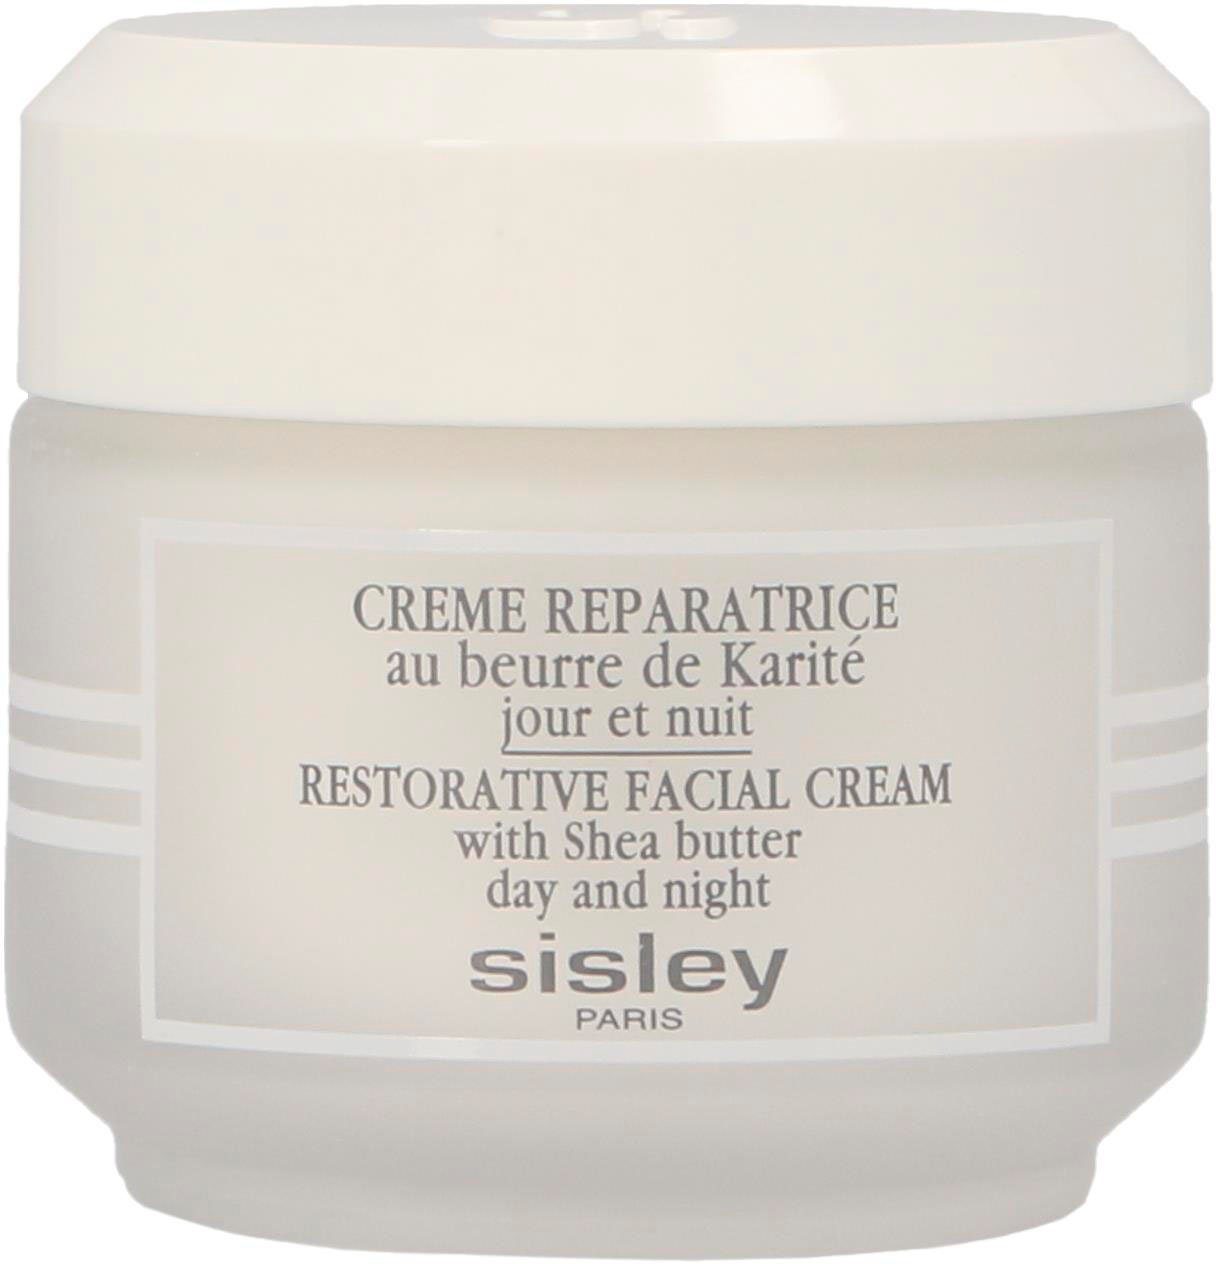 sisley Gesichtspflege Restorative Facial Cream With Shea Butter | Tagescremes